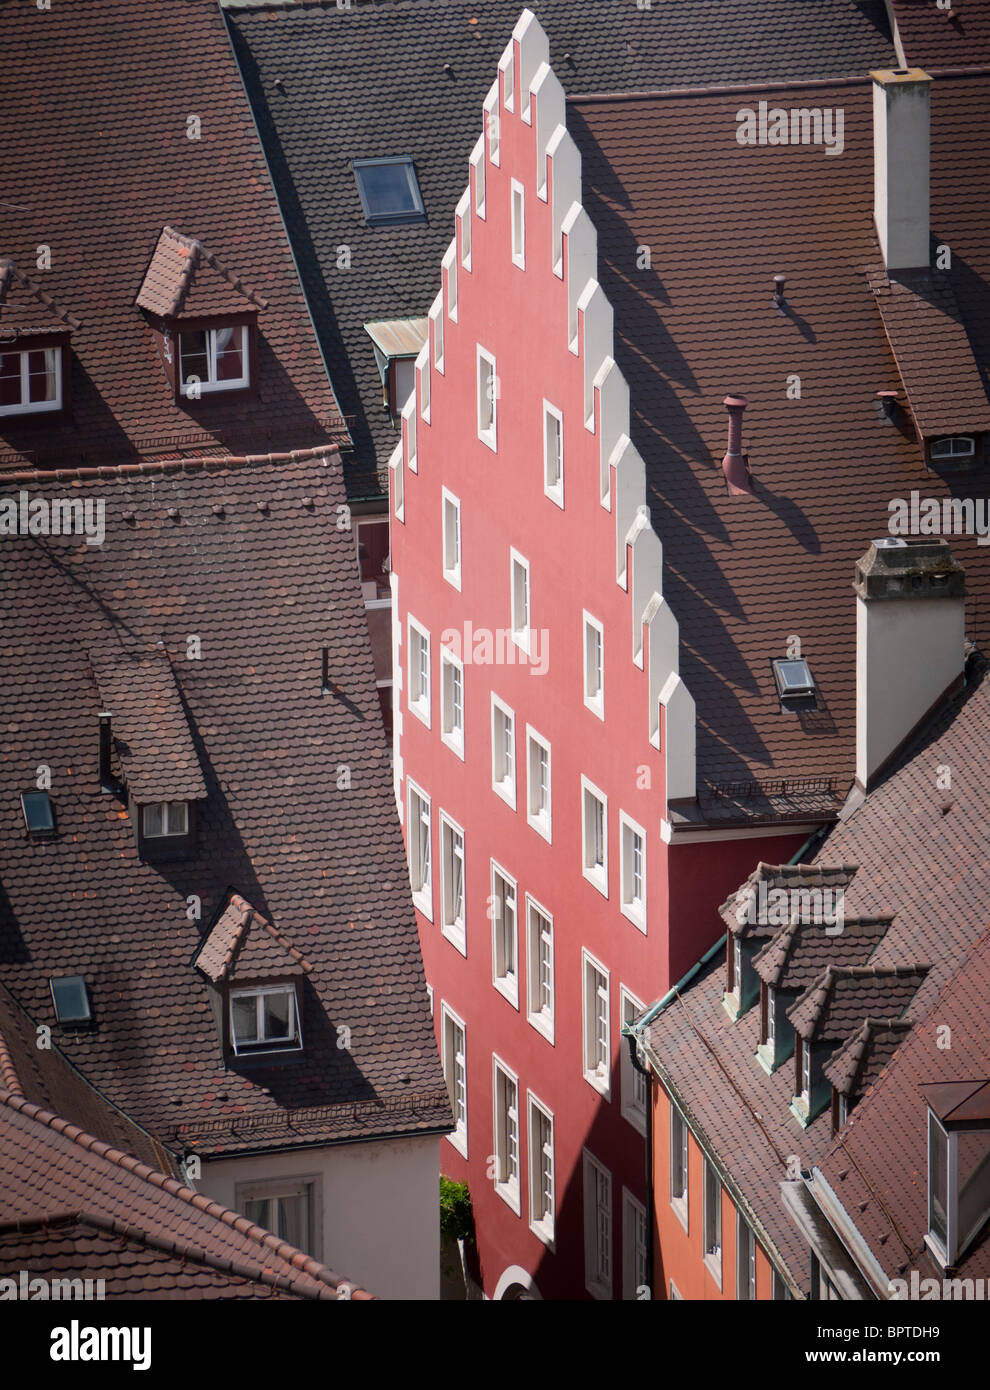 A historic facade in the old town of Freiburg im Breisgau in Southern Germany. Stock Photo